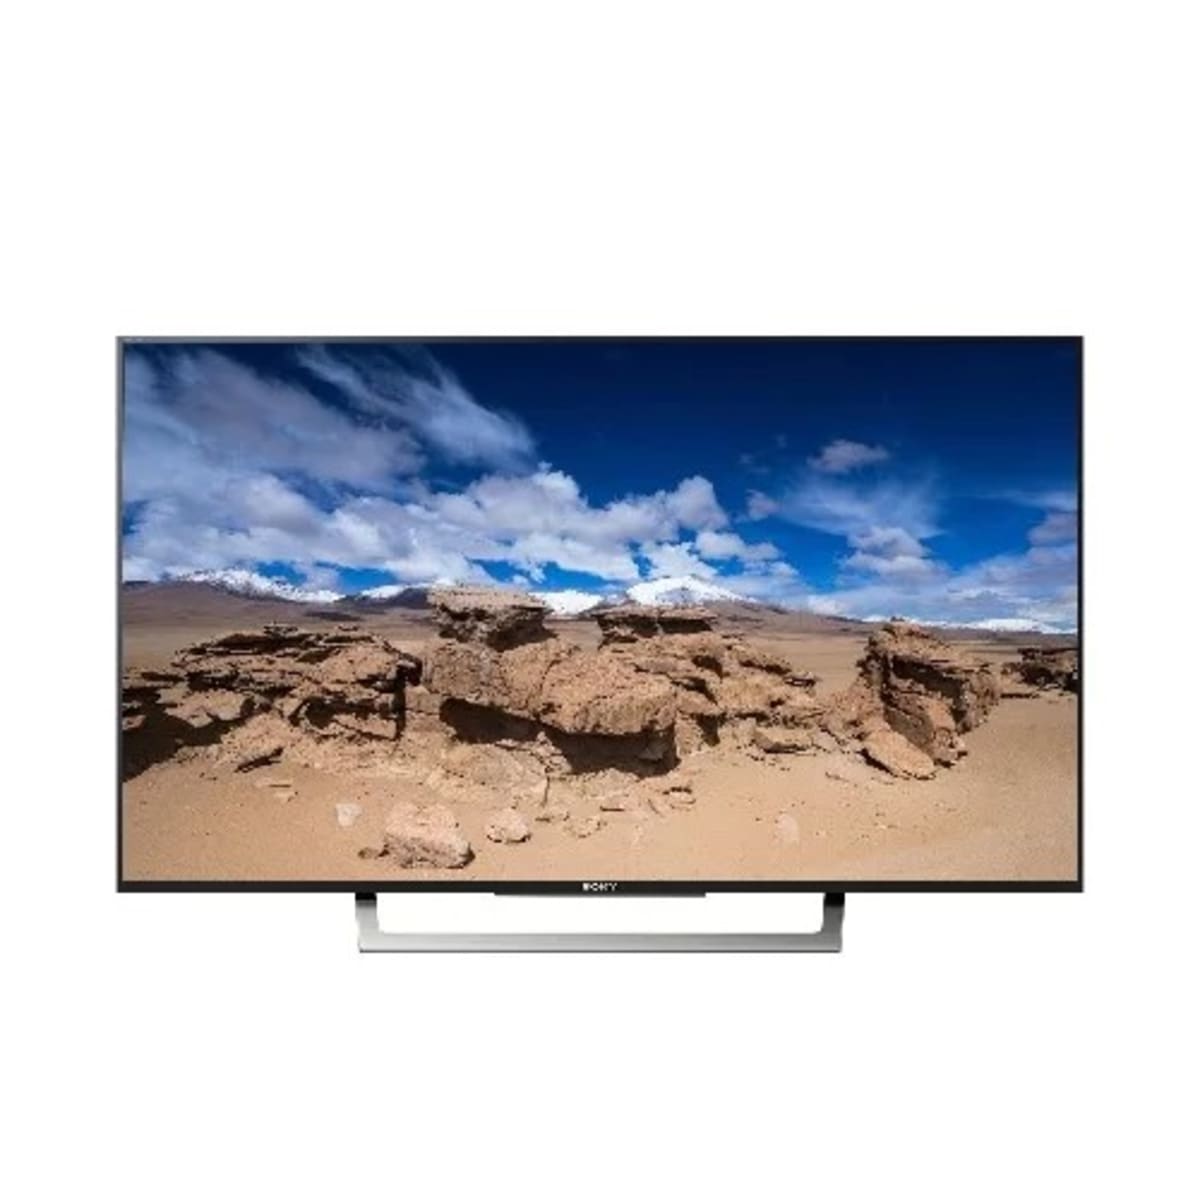 Sony 43 Bravia 4k Hdr Full Android LED TV - Kd-43x800d